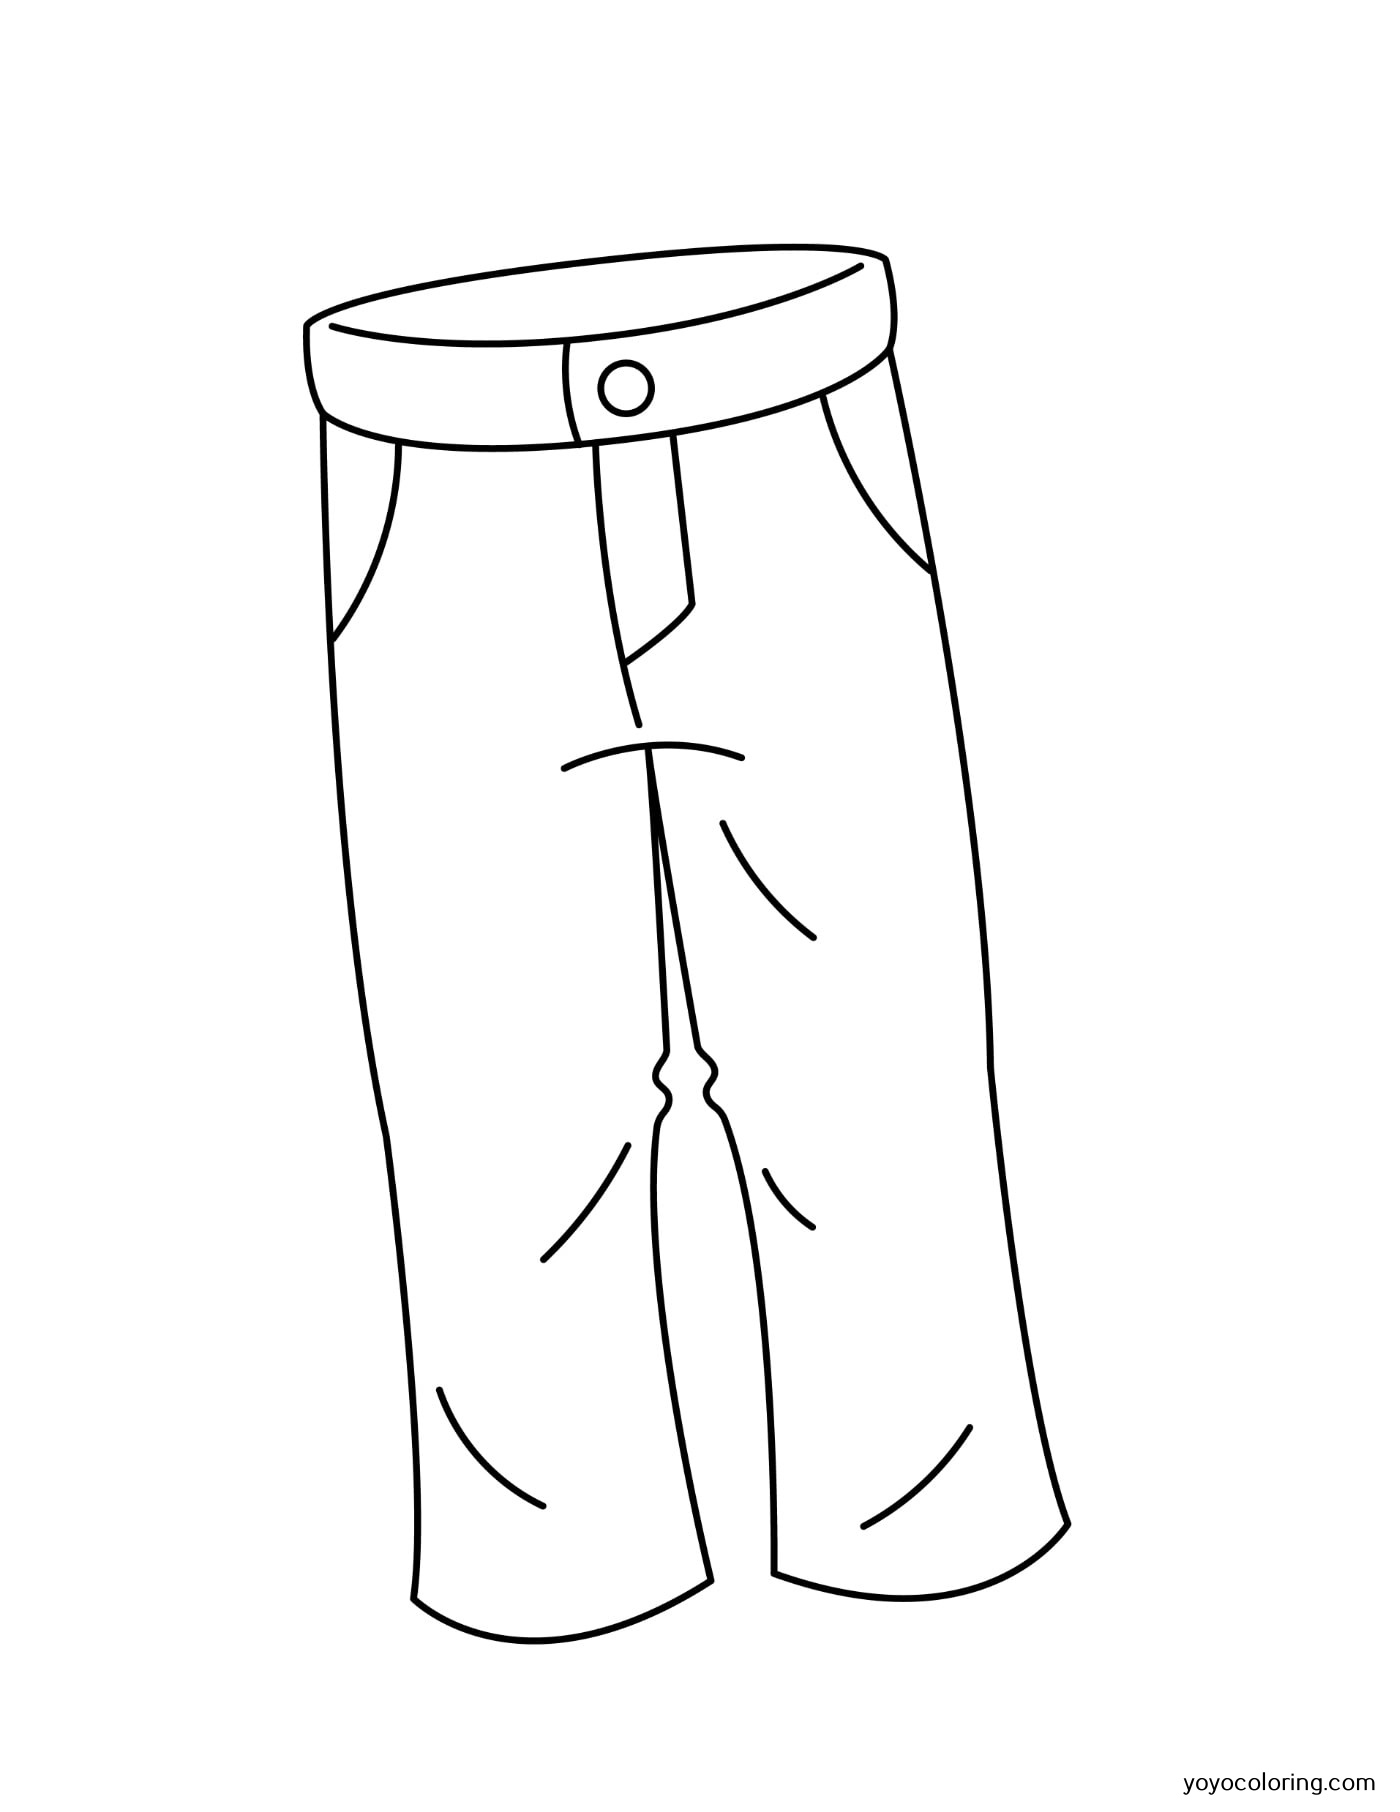 Clothes coloring pages | Coloring pages to download and print